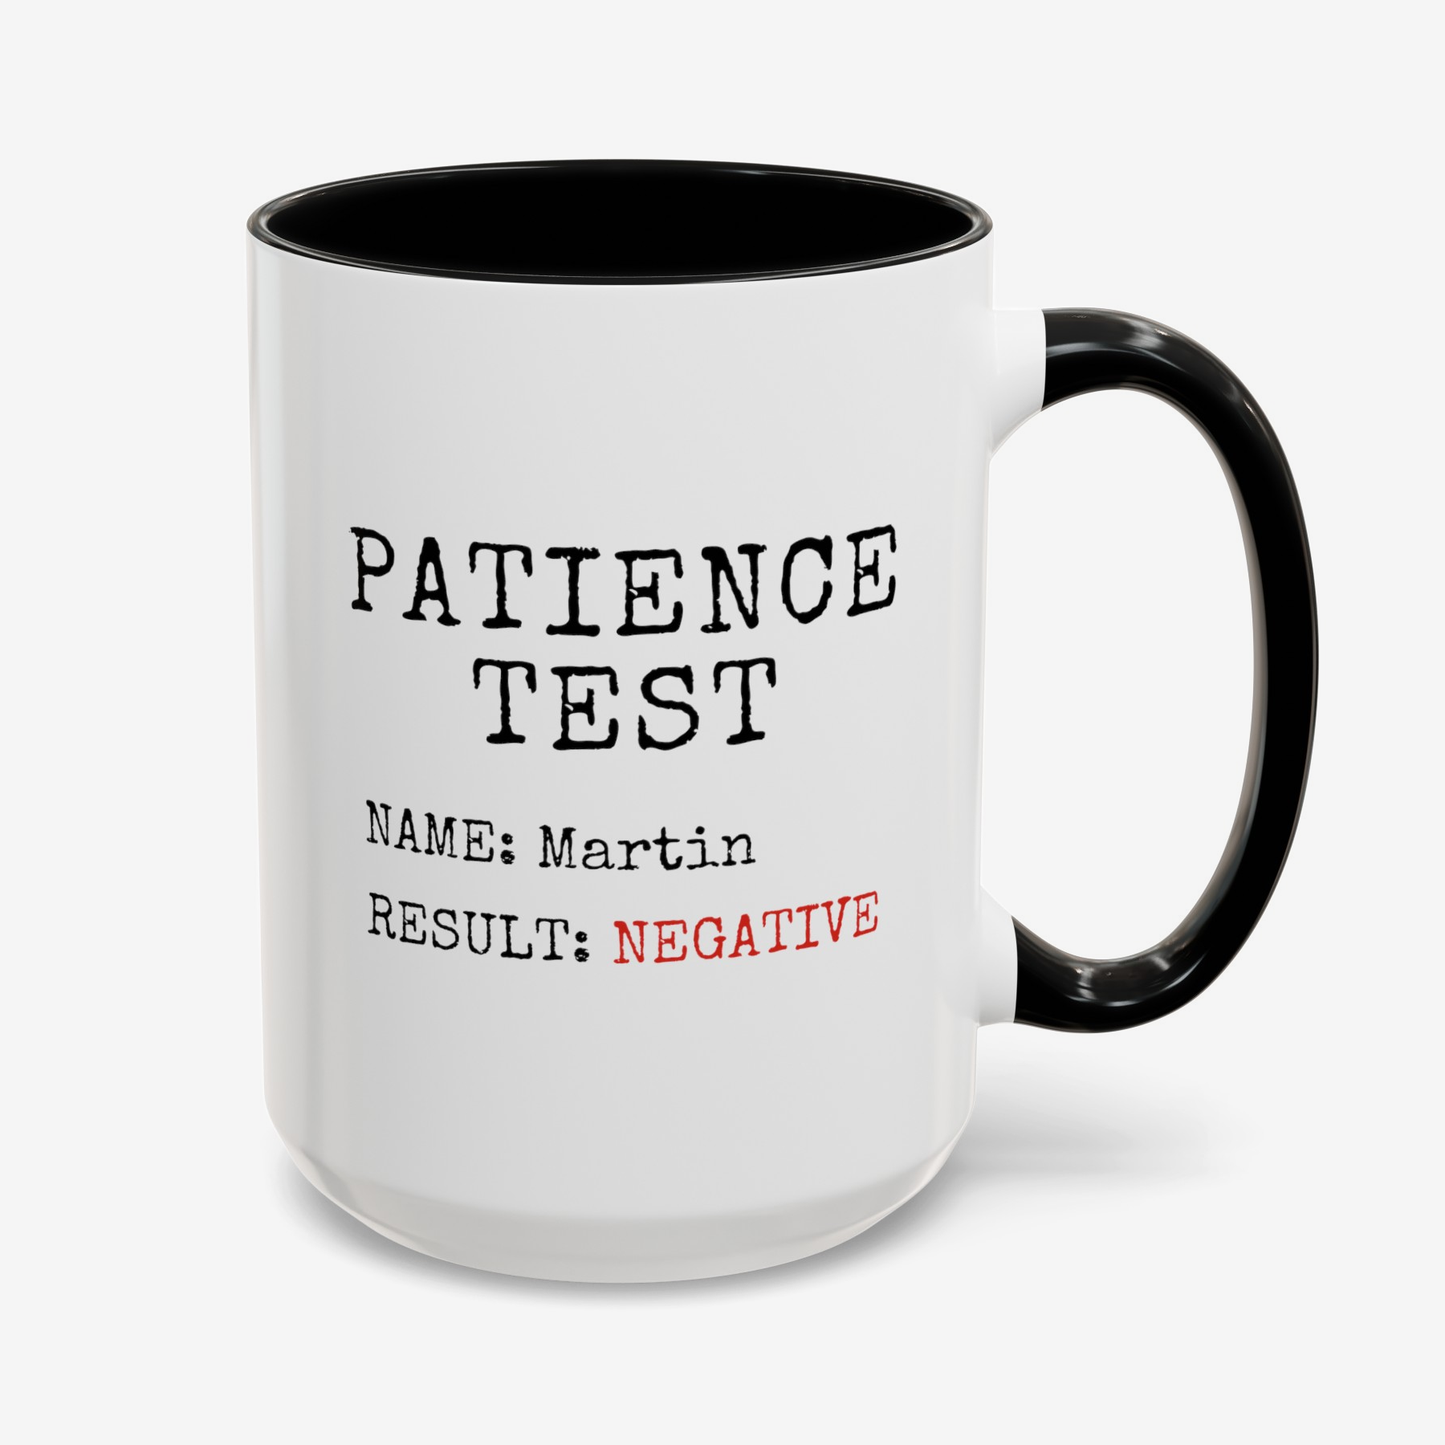 Personalized Patience Test 15oz white with black accent funny large coffee mug gift for coworker custom customize name boss manager colleague friend sarcastic sarcasm result waveywares wavey wares wavywares wavy wares cover